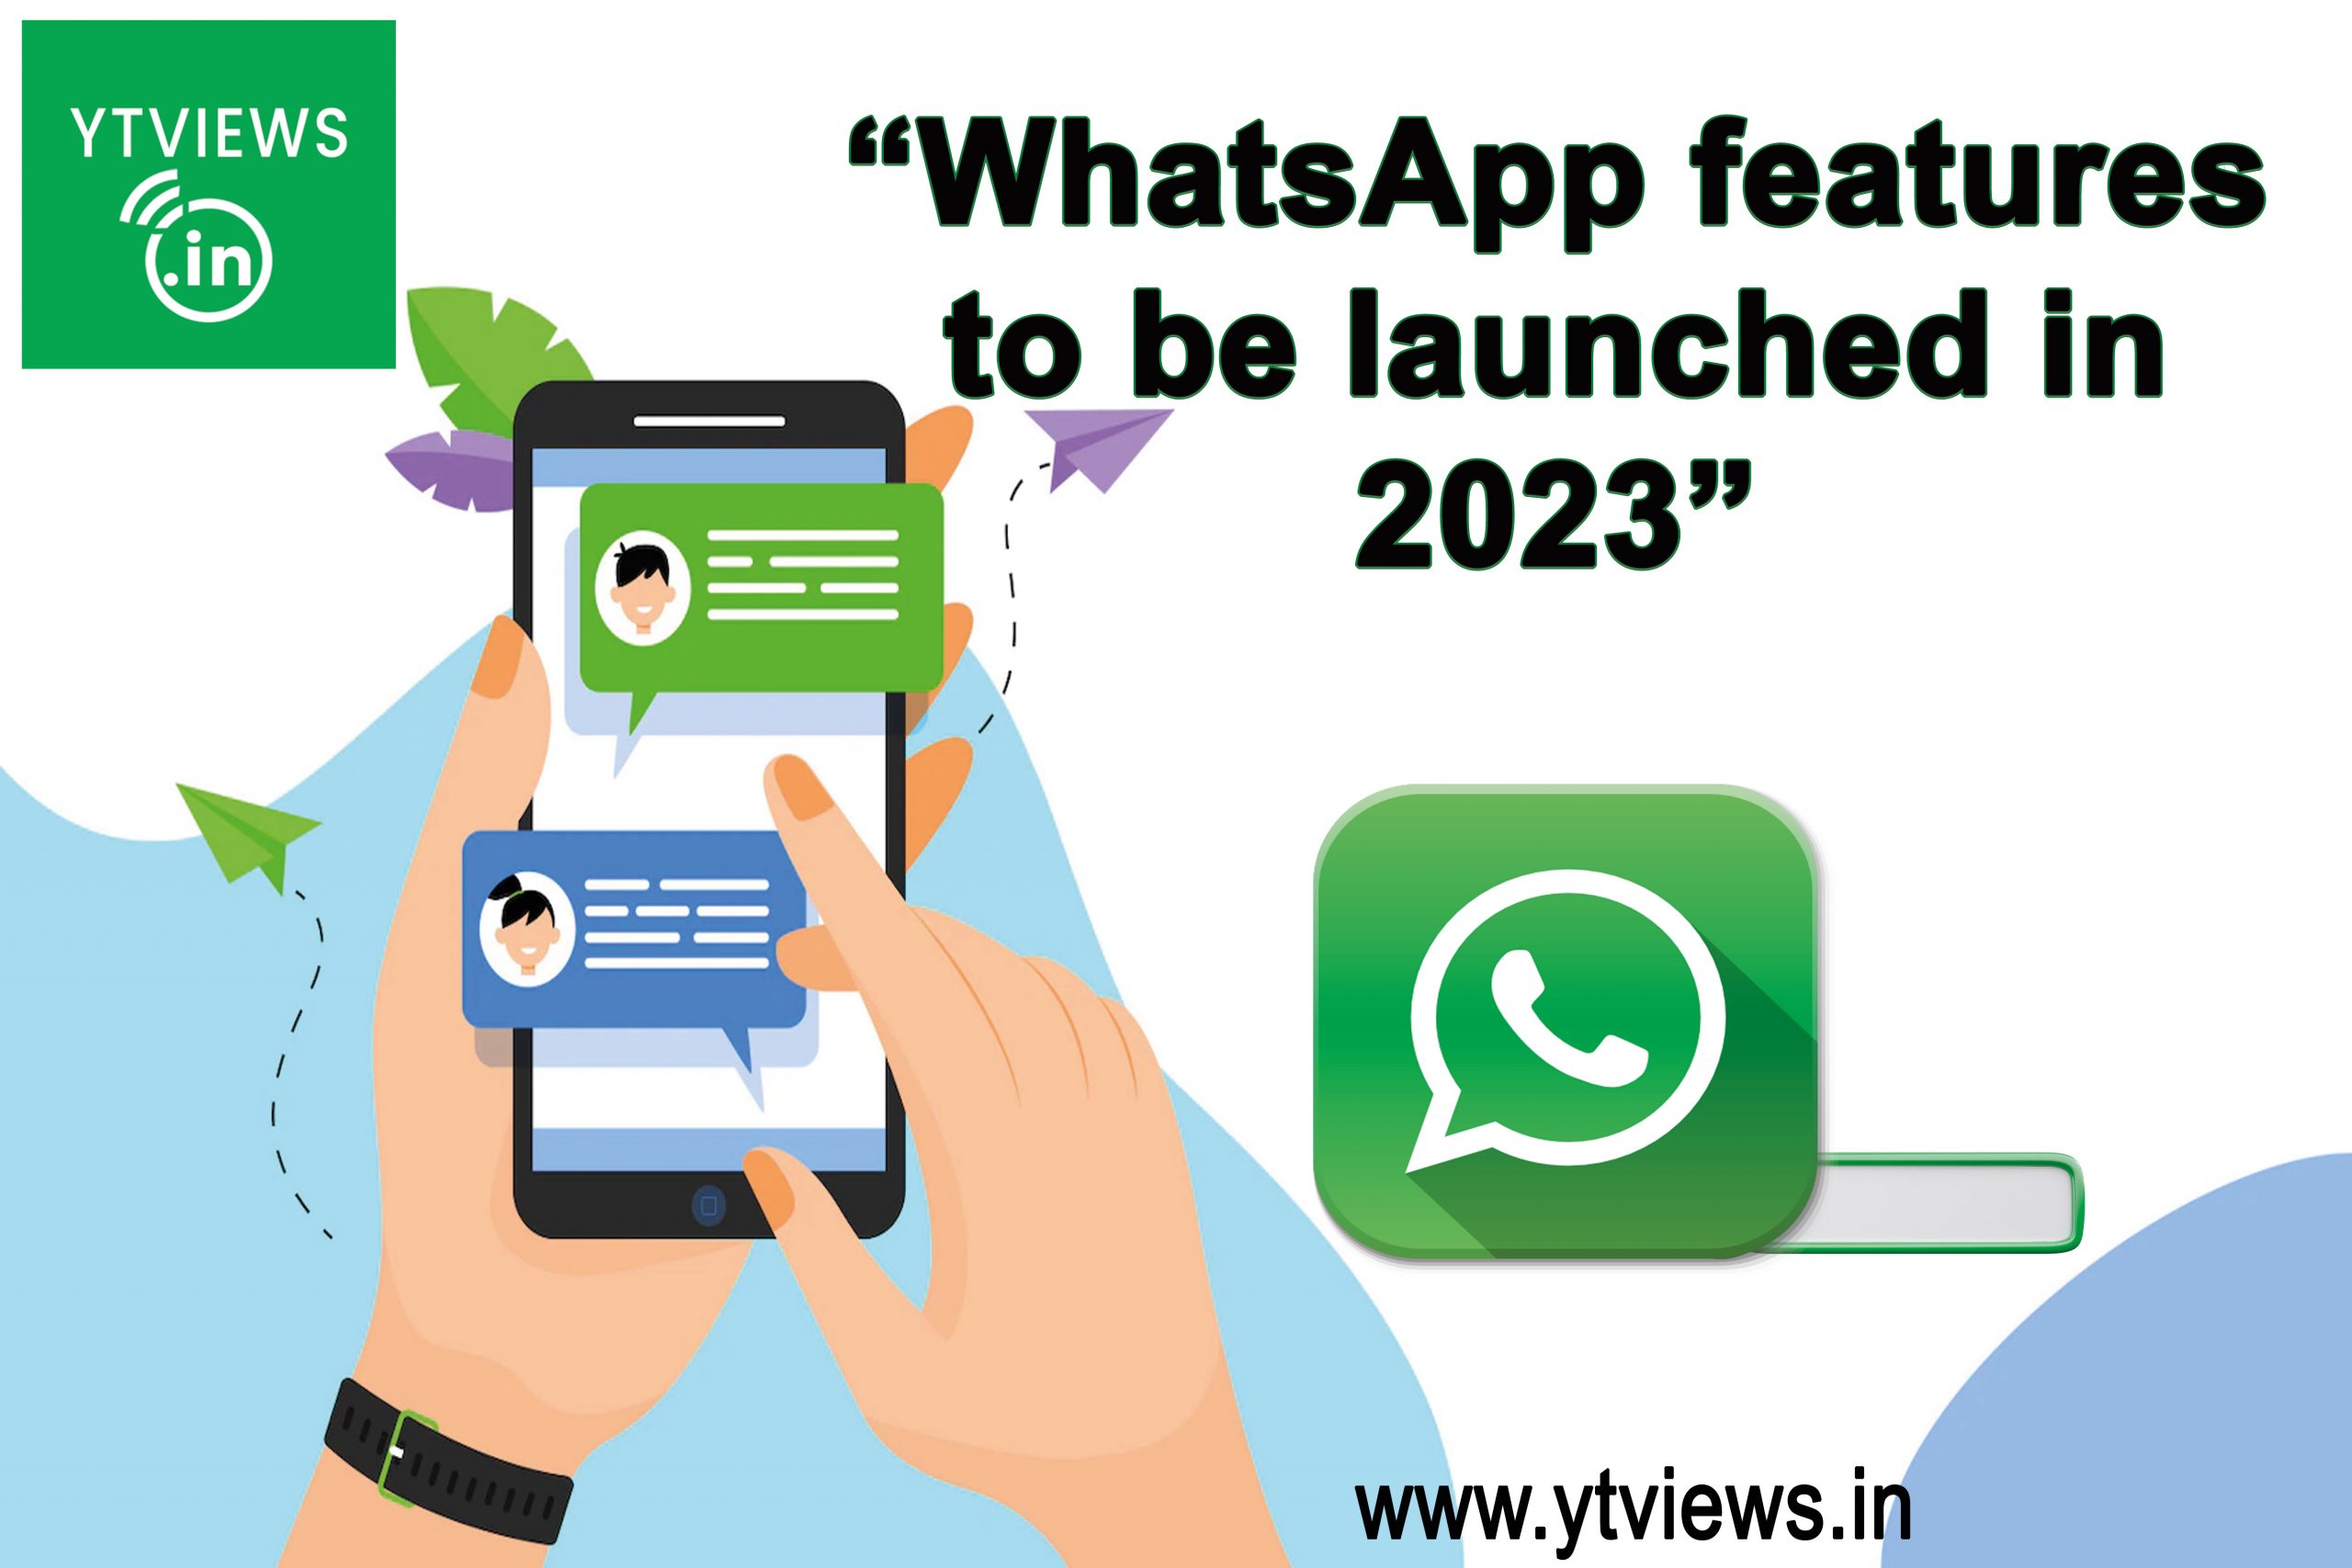 WhatsApp features to be launched in 2023